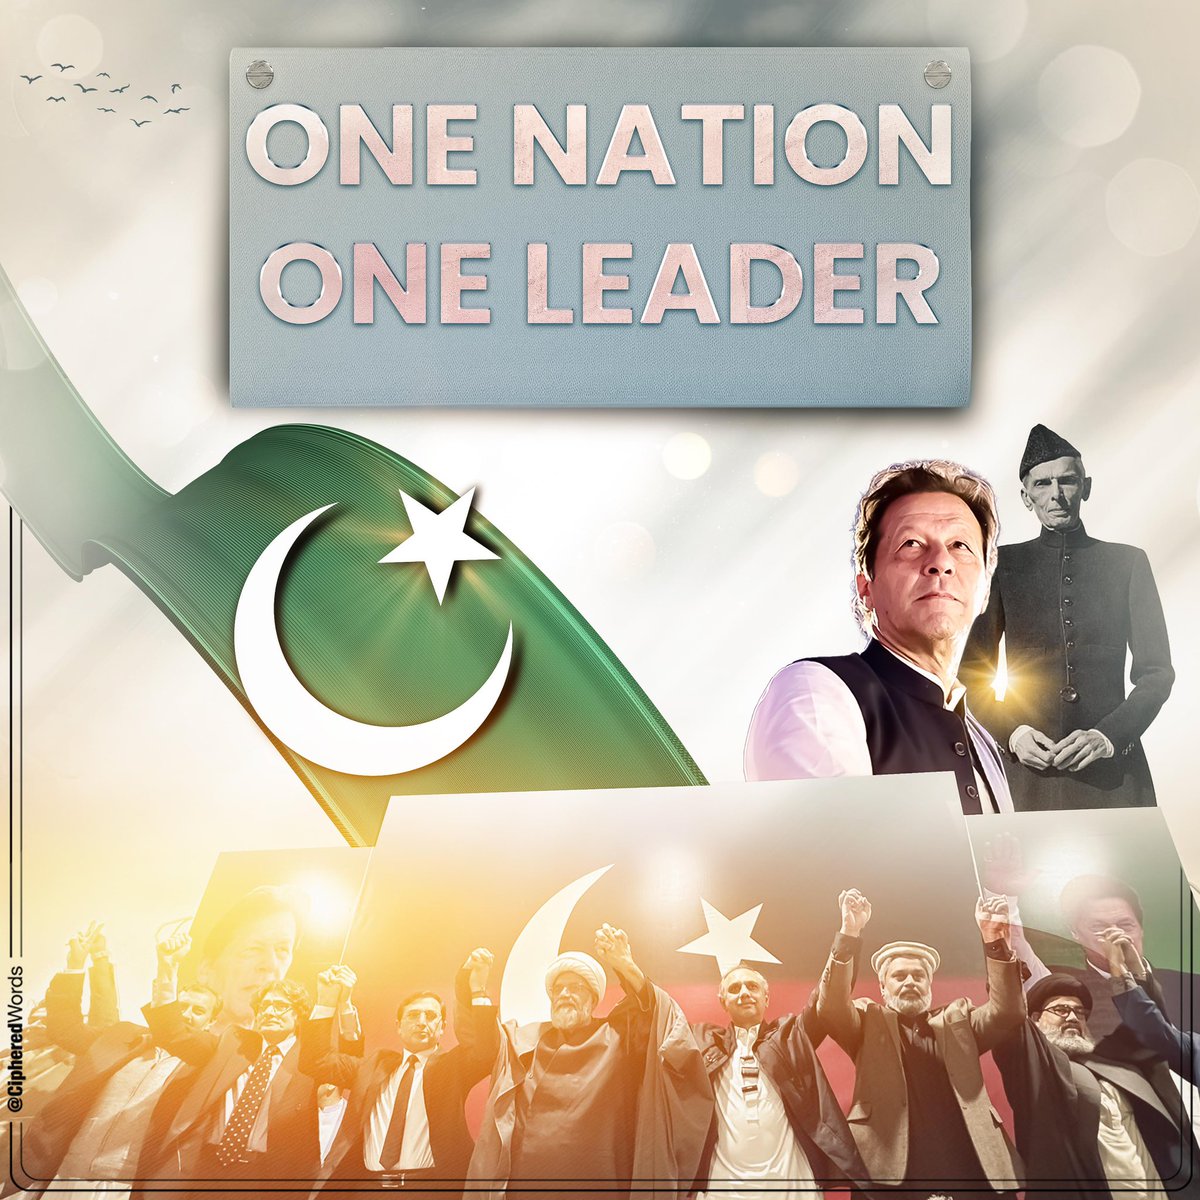 One Nation, One Leader!